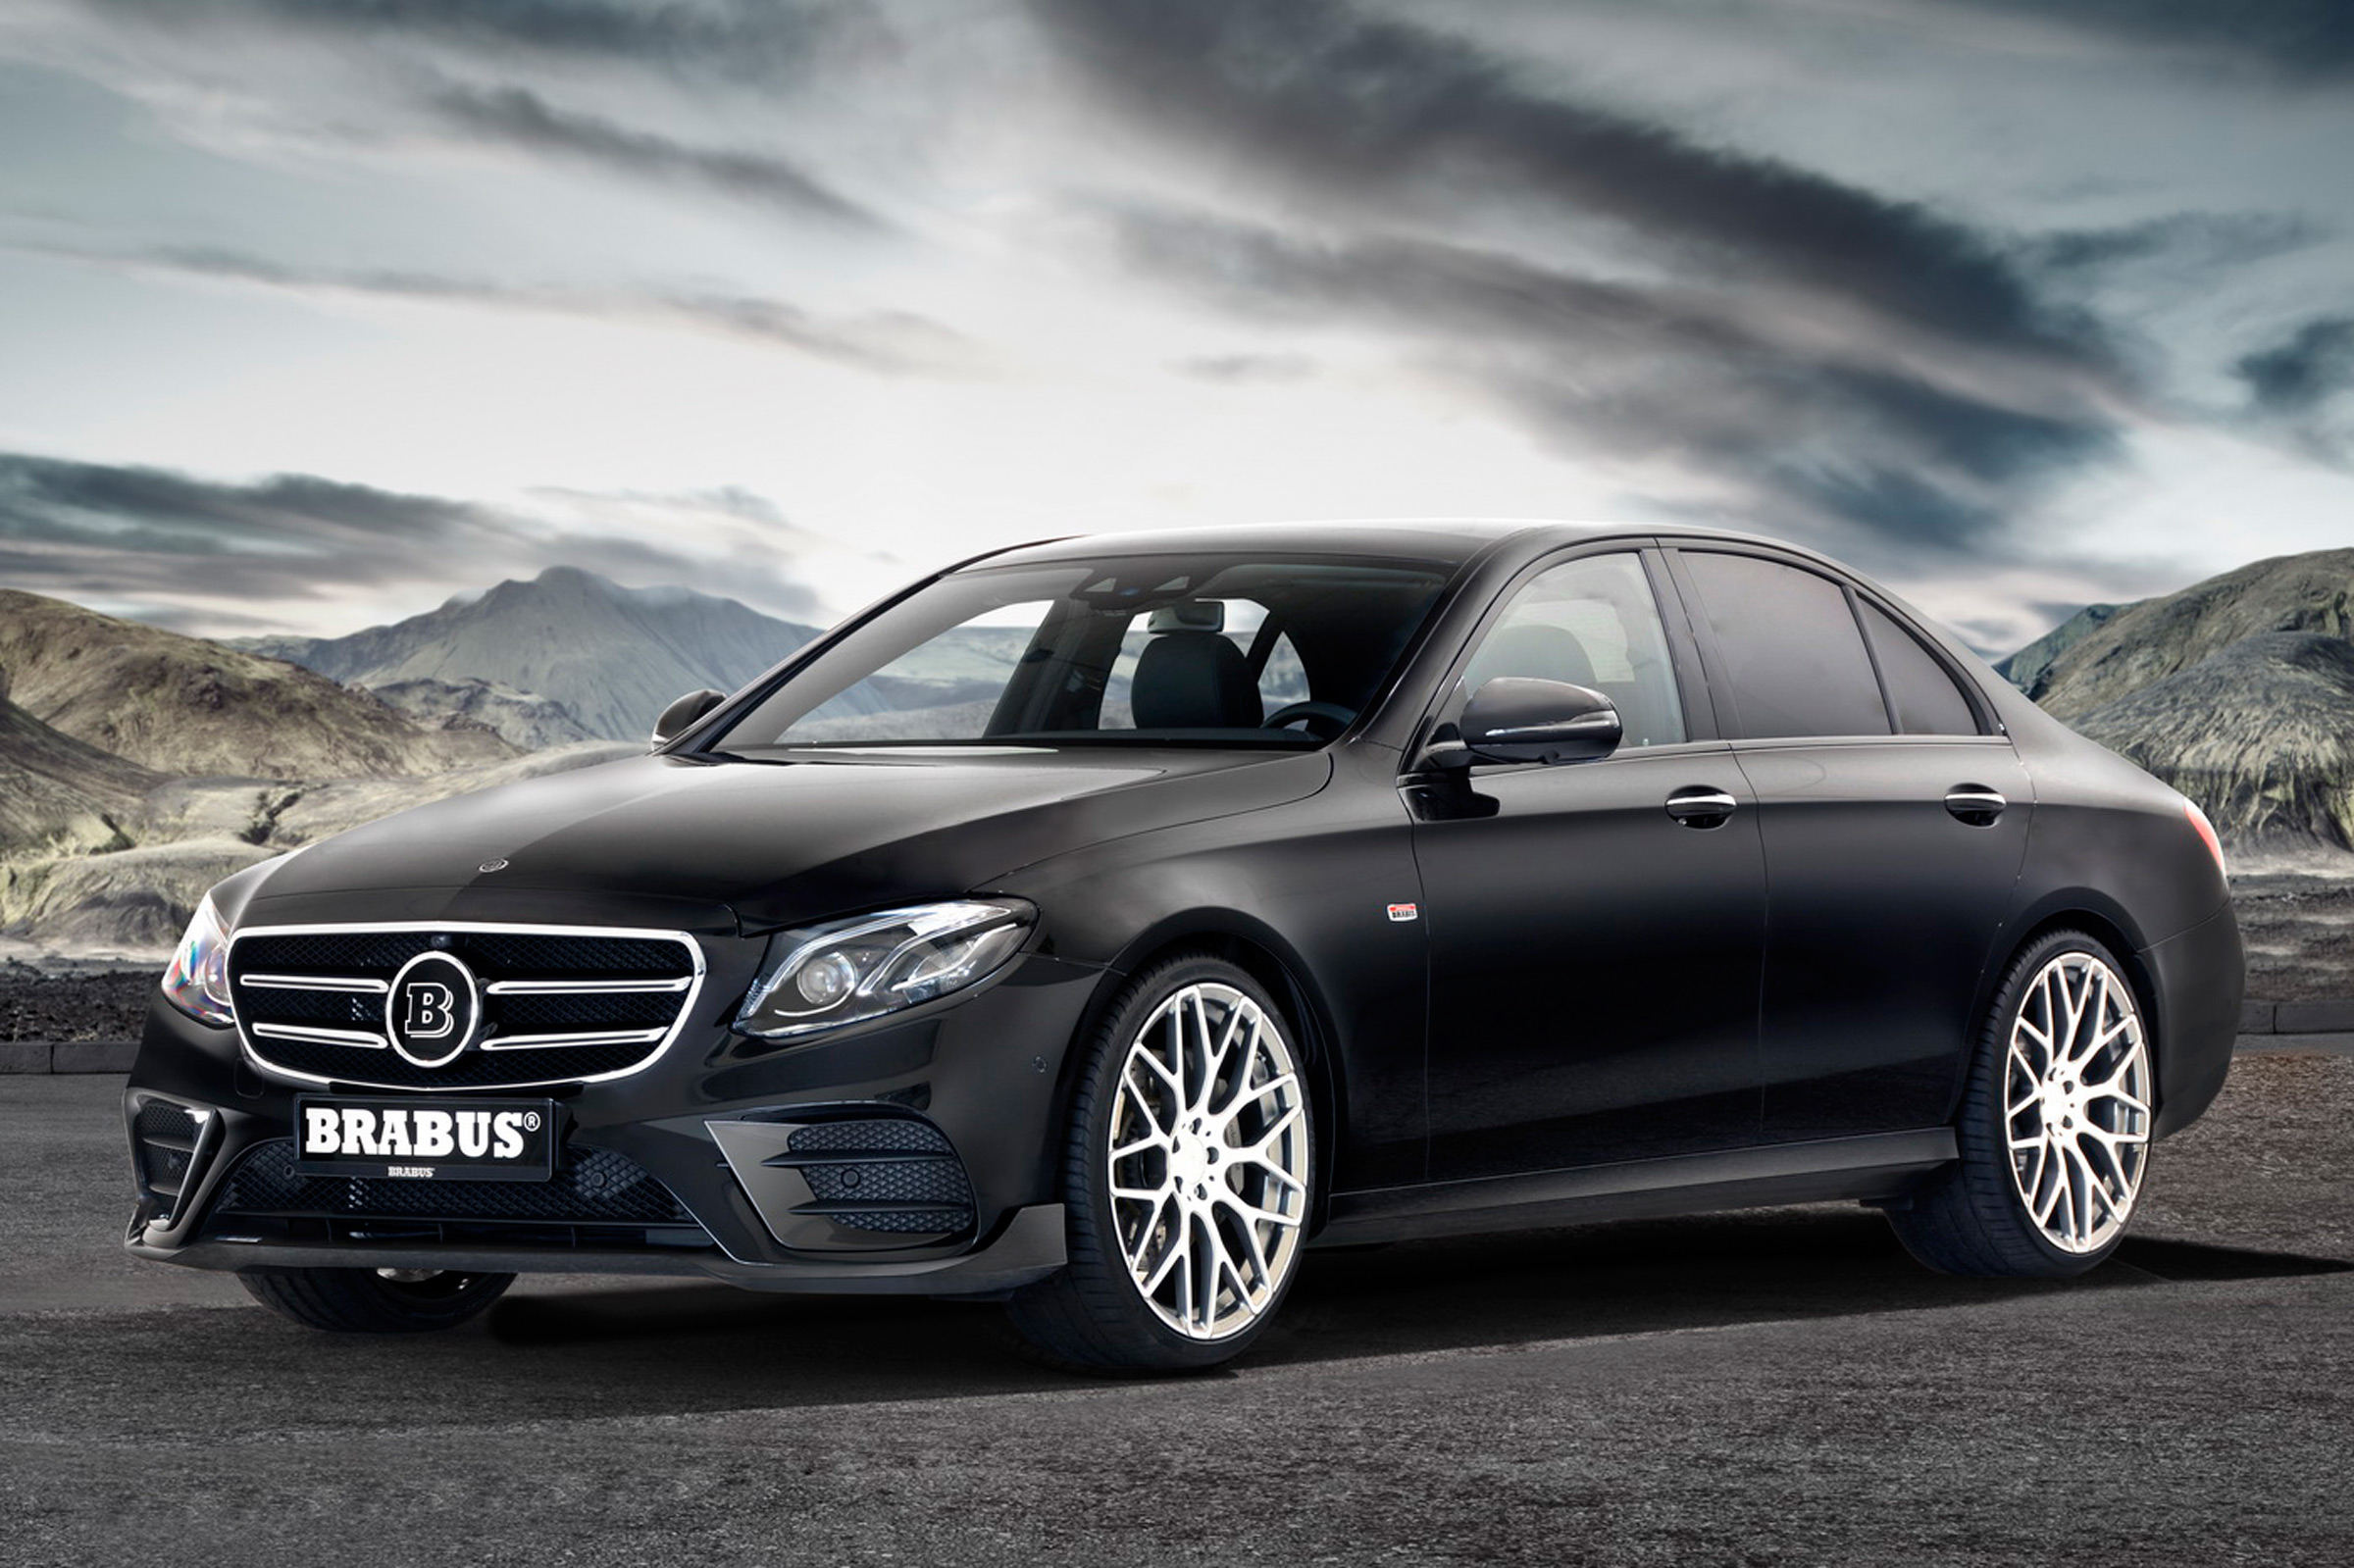 Brabus reveals aftermarket options for the Mercedes E 